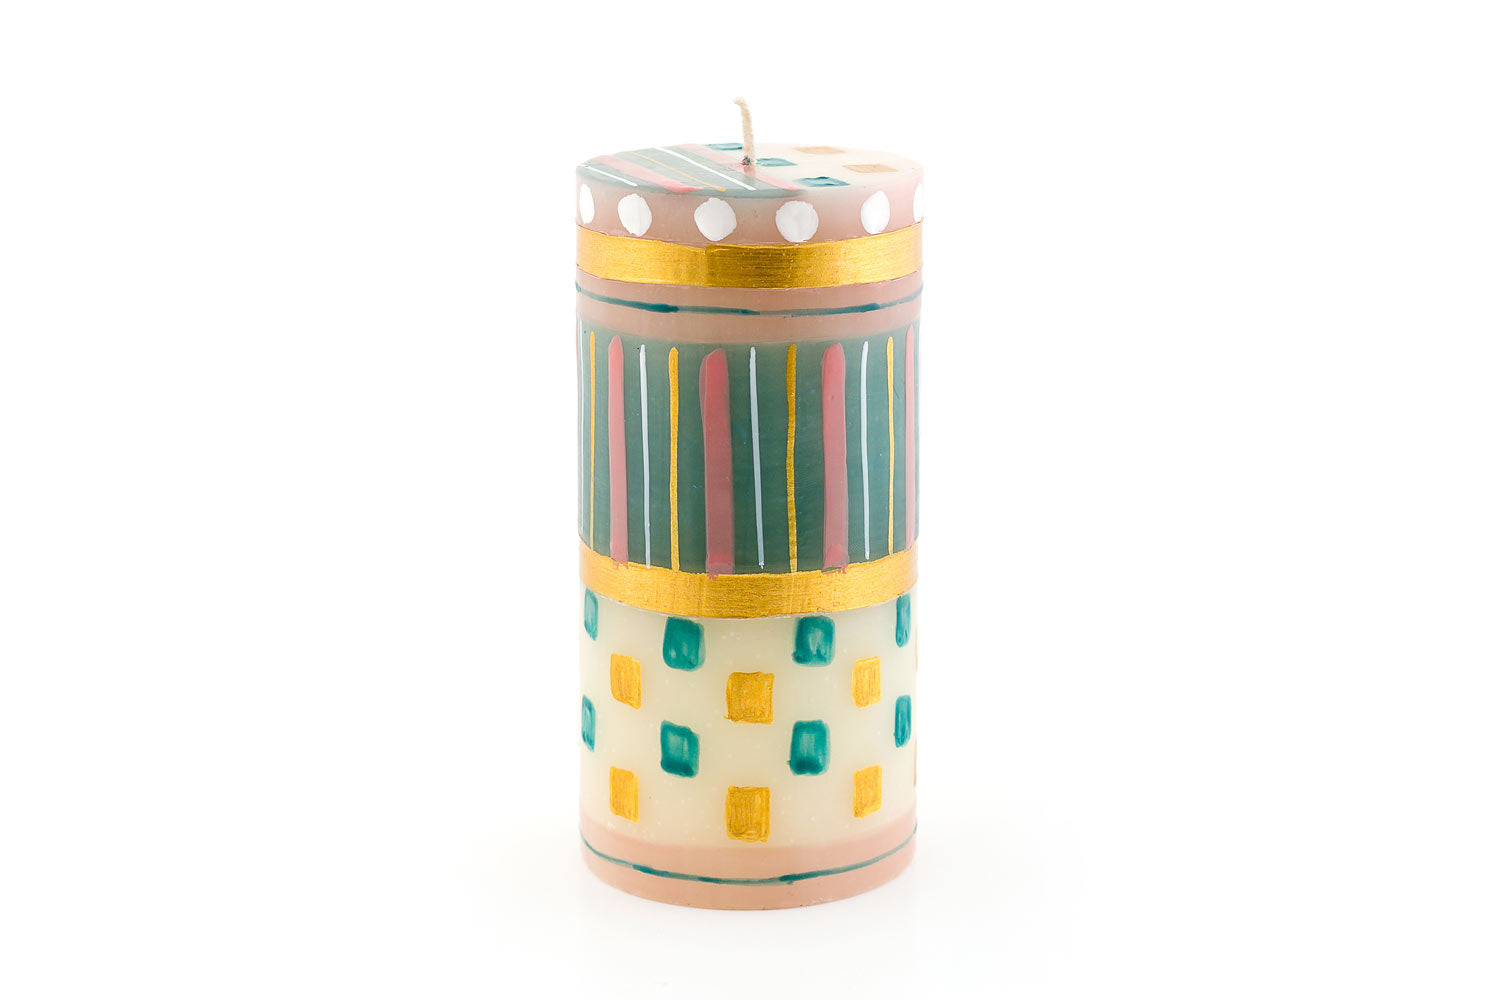 Delight 3x6inch pillar candle.  Hand painted in turquoise, pink, gold and white - stripes, dots and small squares. Very fun!